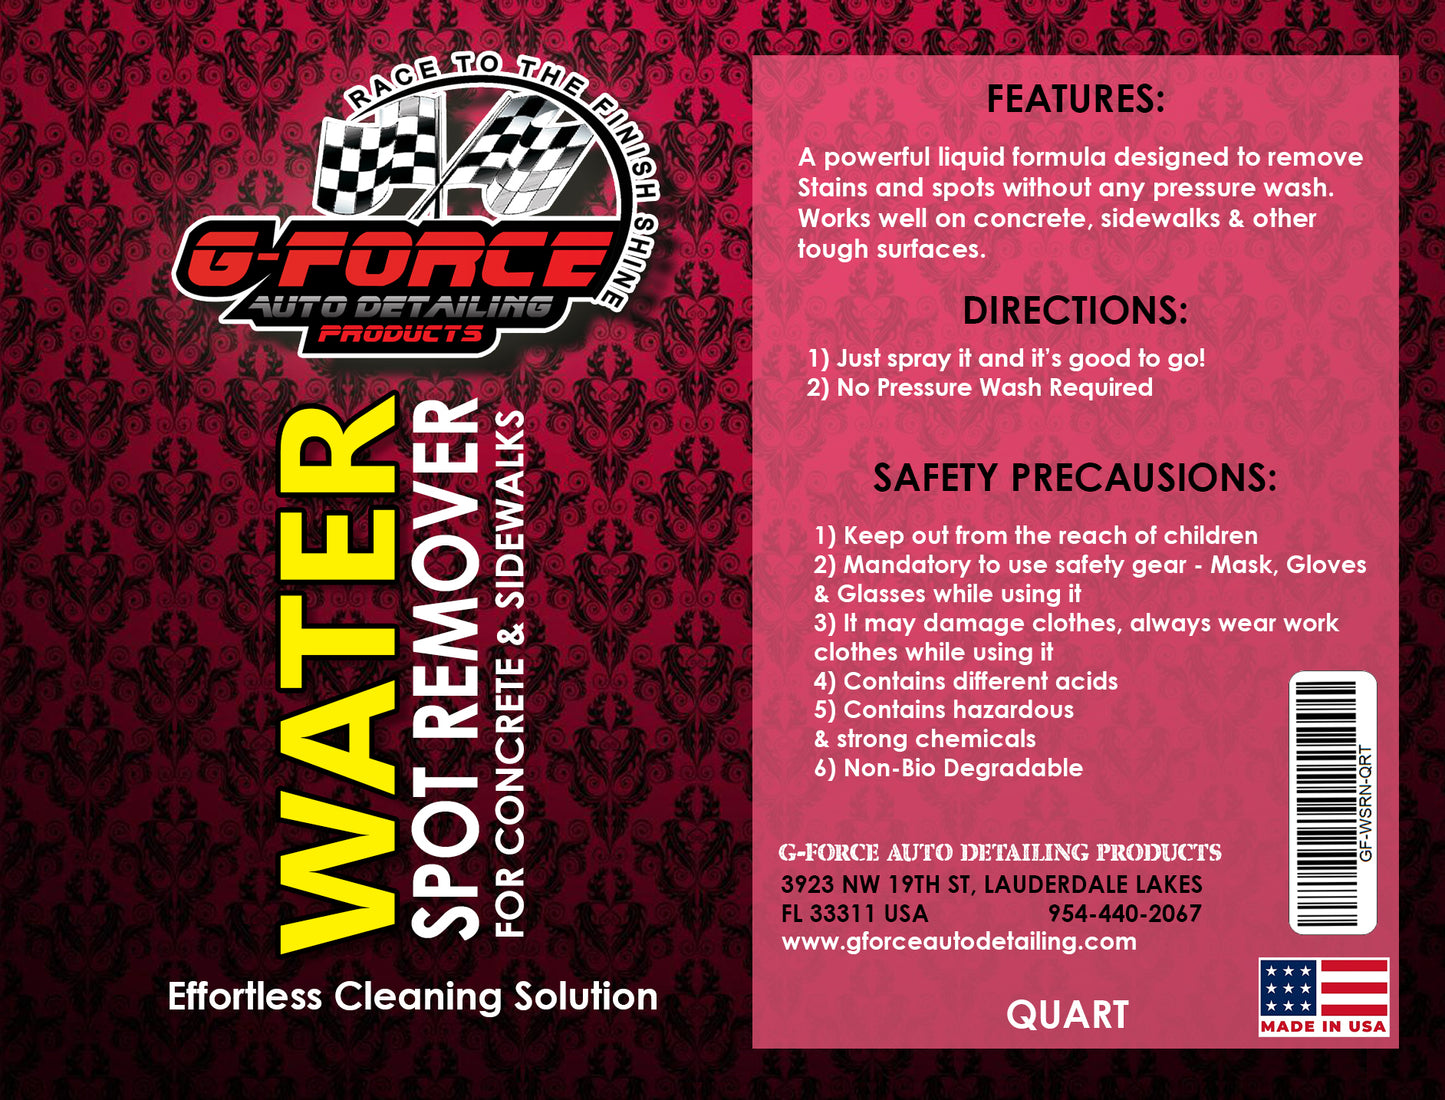 Water Spot Remover - For Concrete & Sidewalks